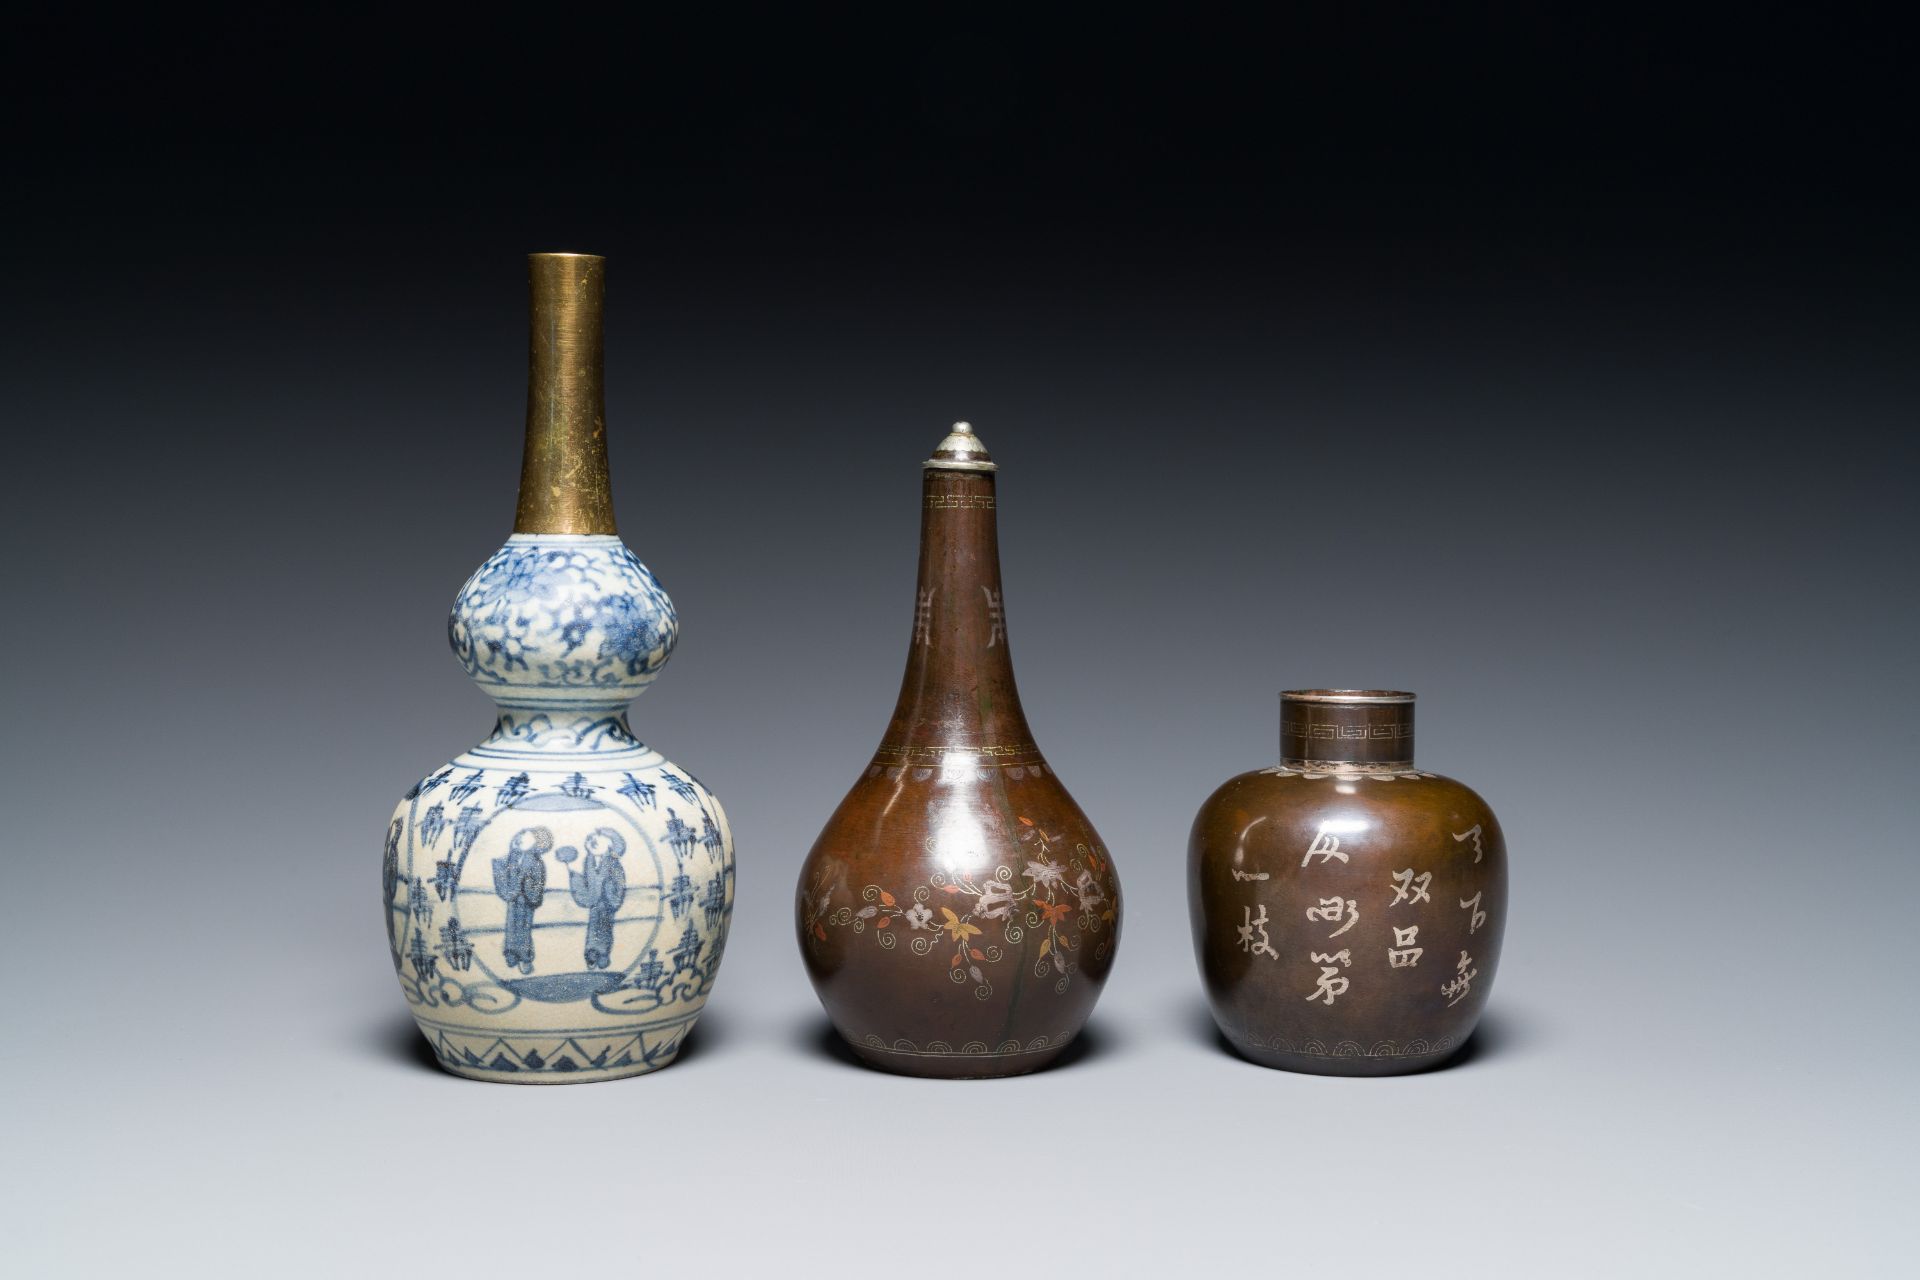 Two Vietnamese copper- and silver-inlaid paktong wares and a Chinese blue and white double gourd vas - Image 4 of 7